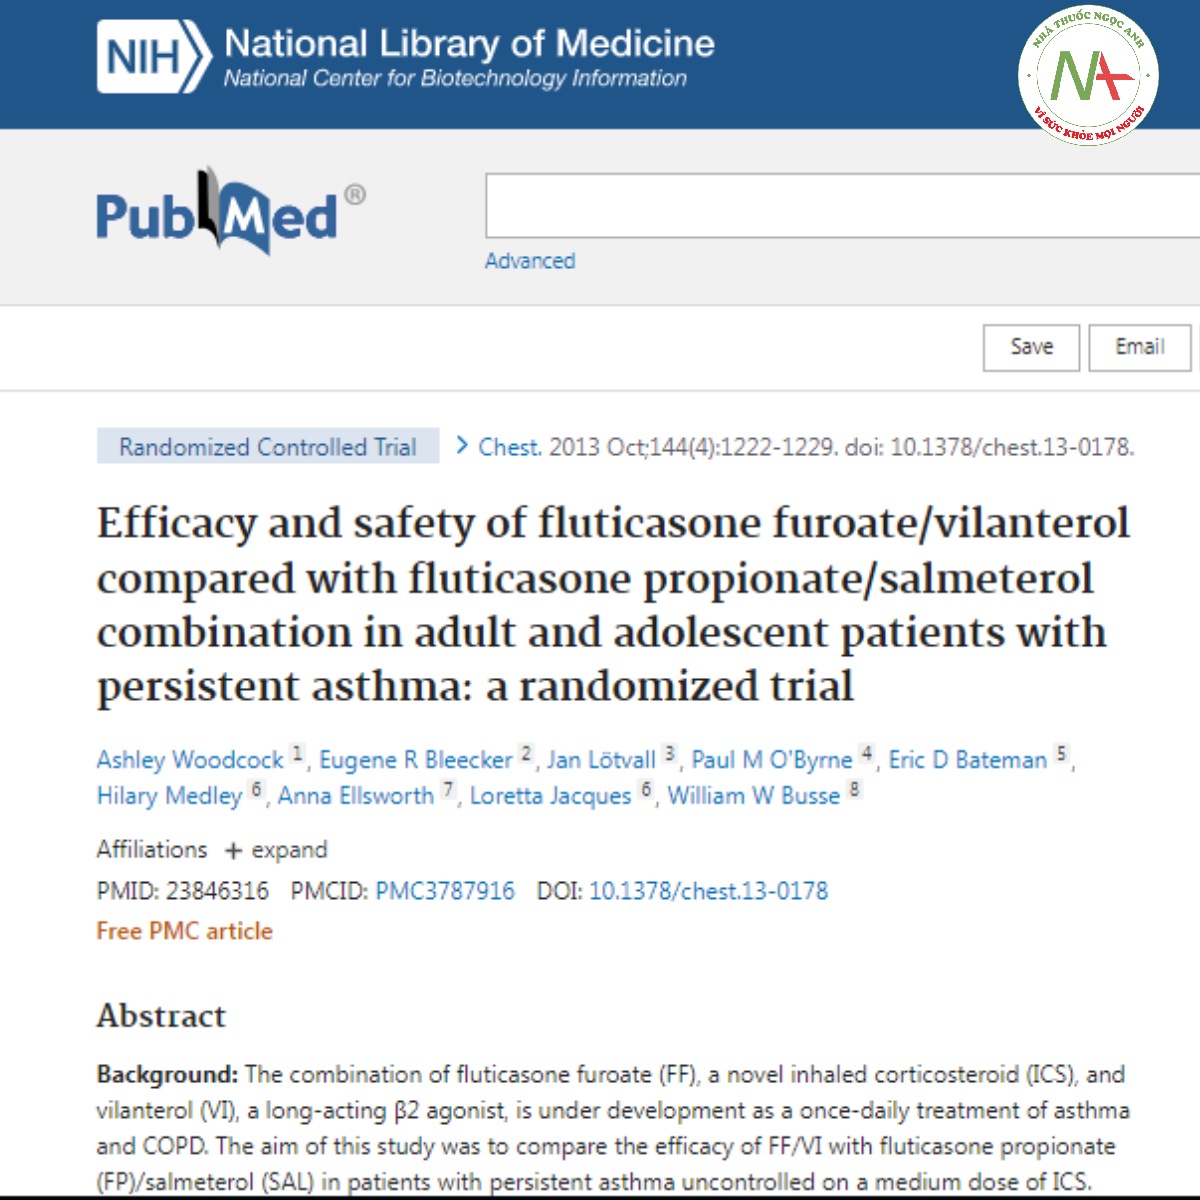 Efficacy and safety of fluticasone furoate_vilanterol compared with fluticasone propionate_salmeterol combination in adult and adolescent patients with persistent asthma_ a randomized trial